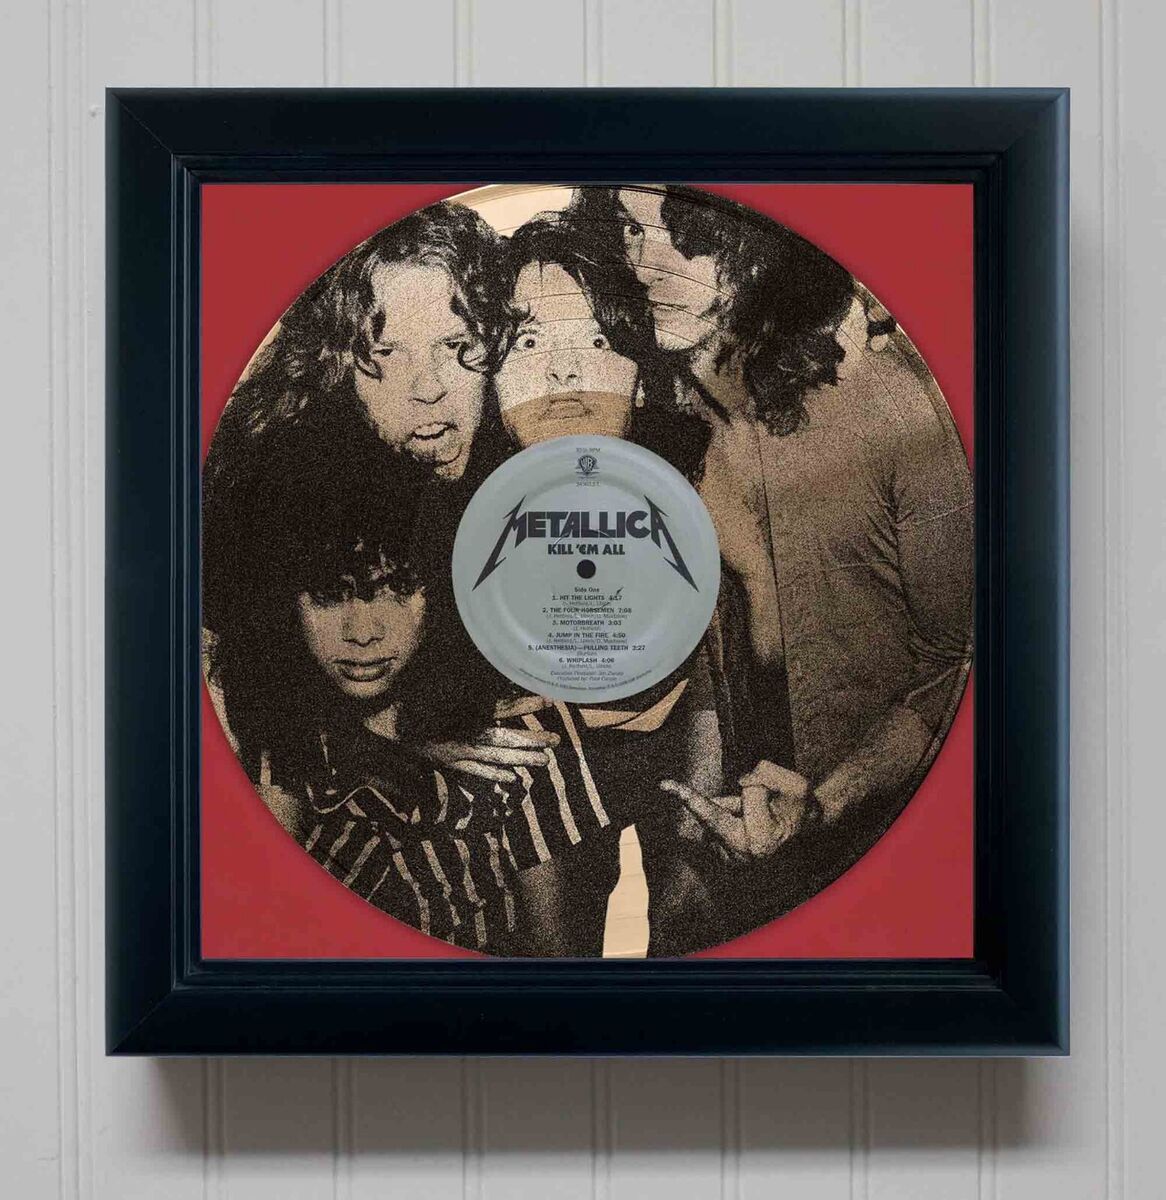 Framed & Ready To Hang Die Cut Vinyl Record - Metallica Faces